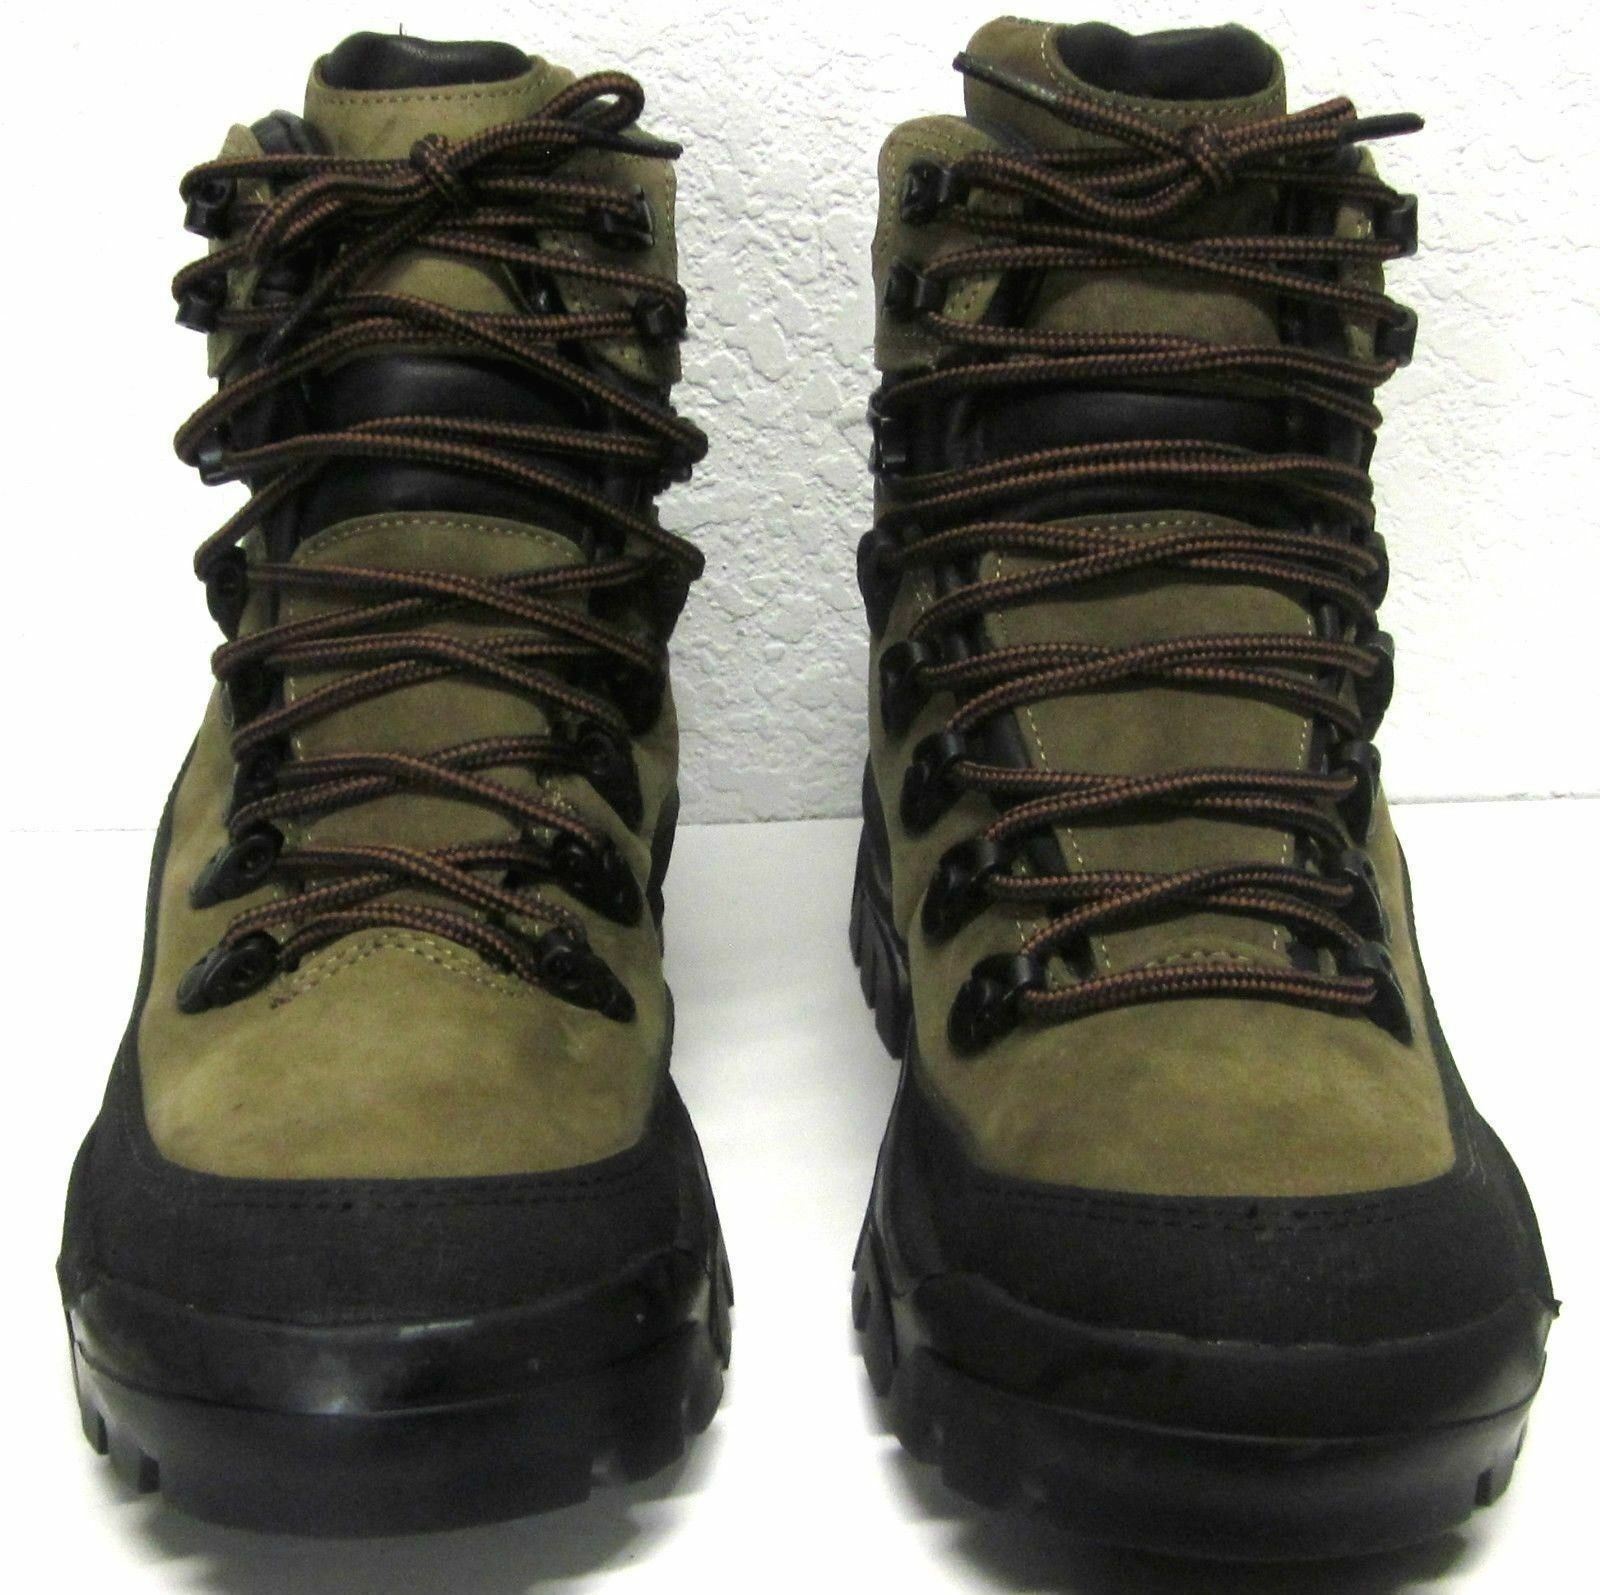 Wellco 87500-007 NWOT US Army Military Hiker Combat Boots MENS 6XW ...